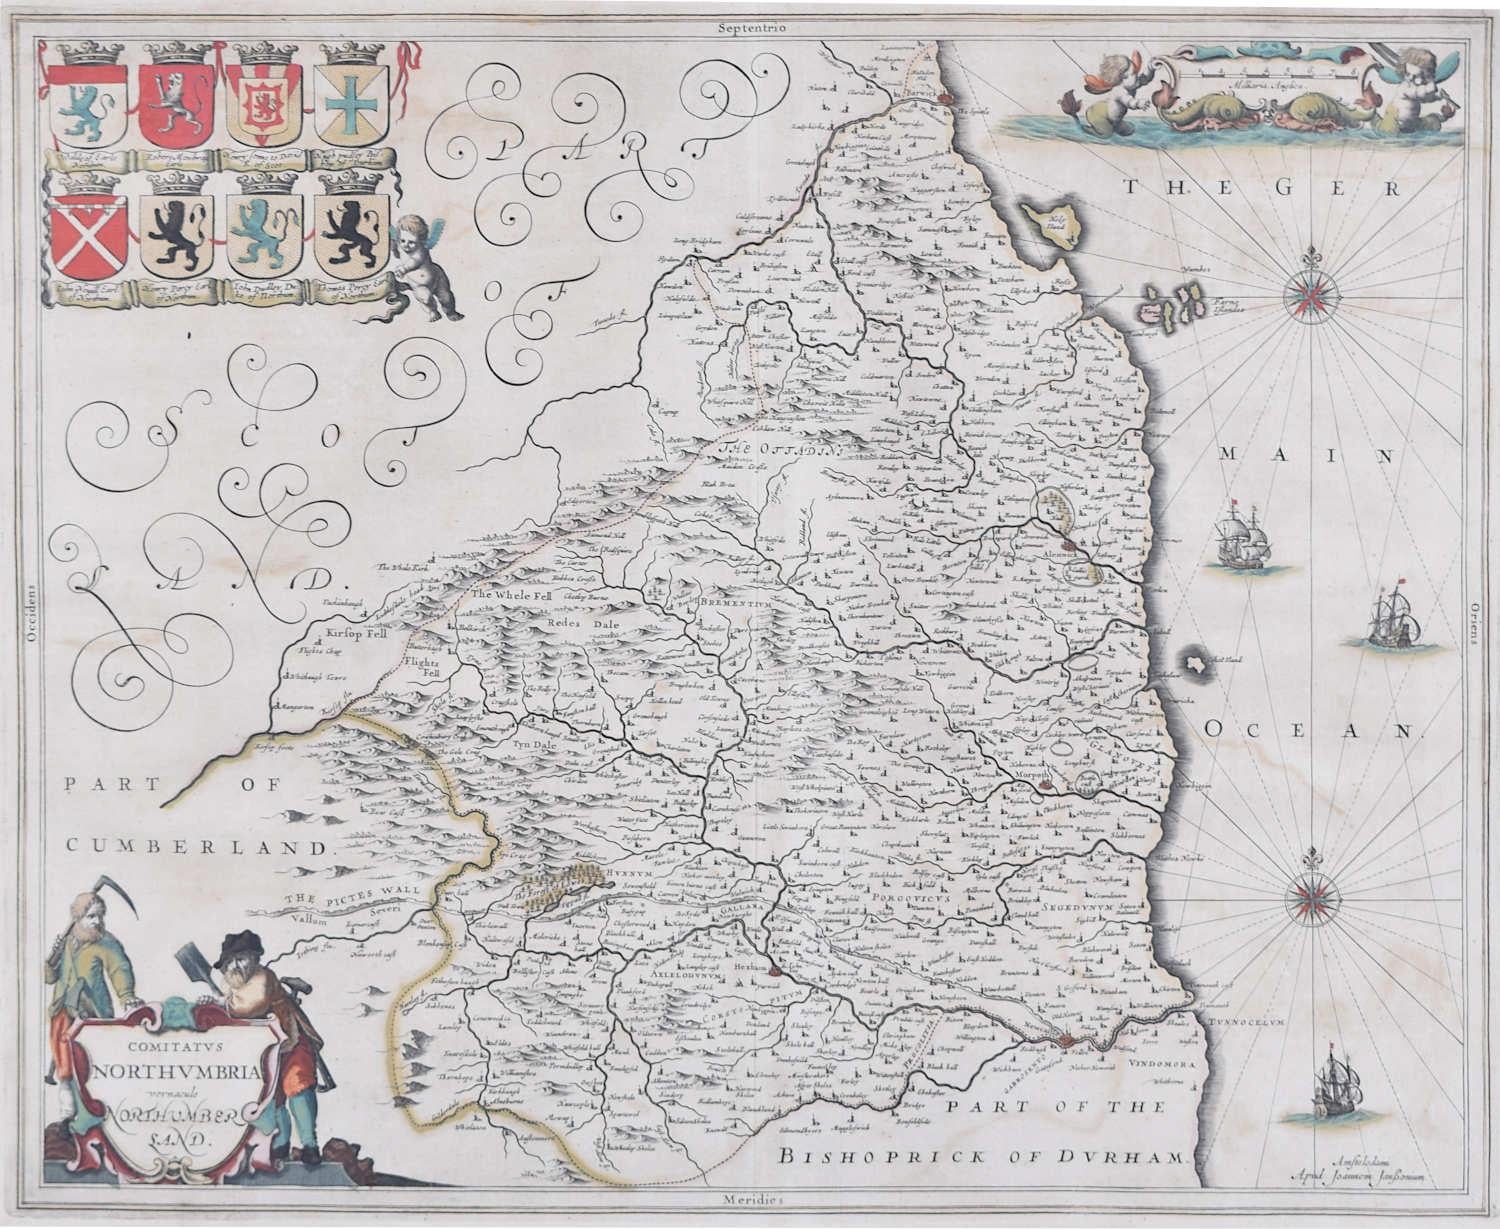 To see our other original maps, scroll down to "More from this Seller" and below it click on "See all from this Seller" - or send us a message if you cannot find the poster you want.

Joannem Janssonium (1588 - 1664) 
Map of Northumberland